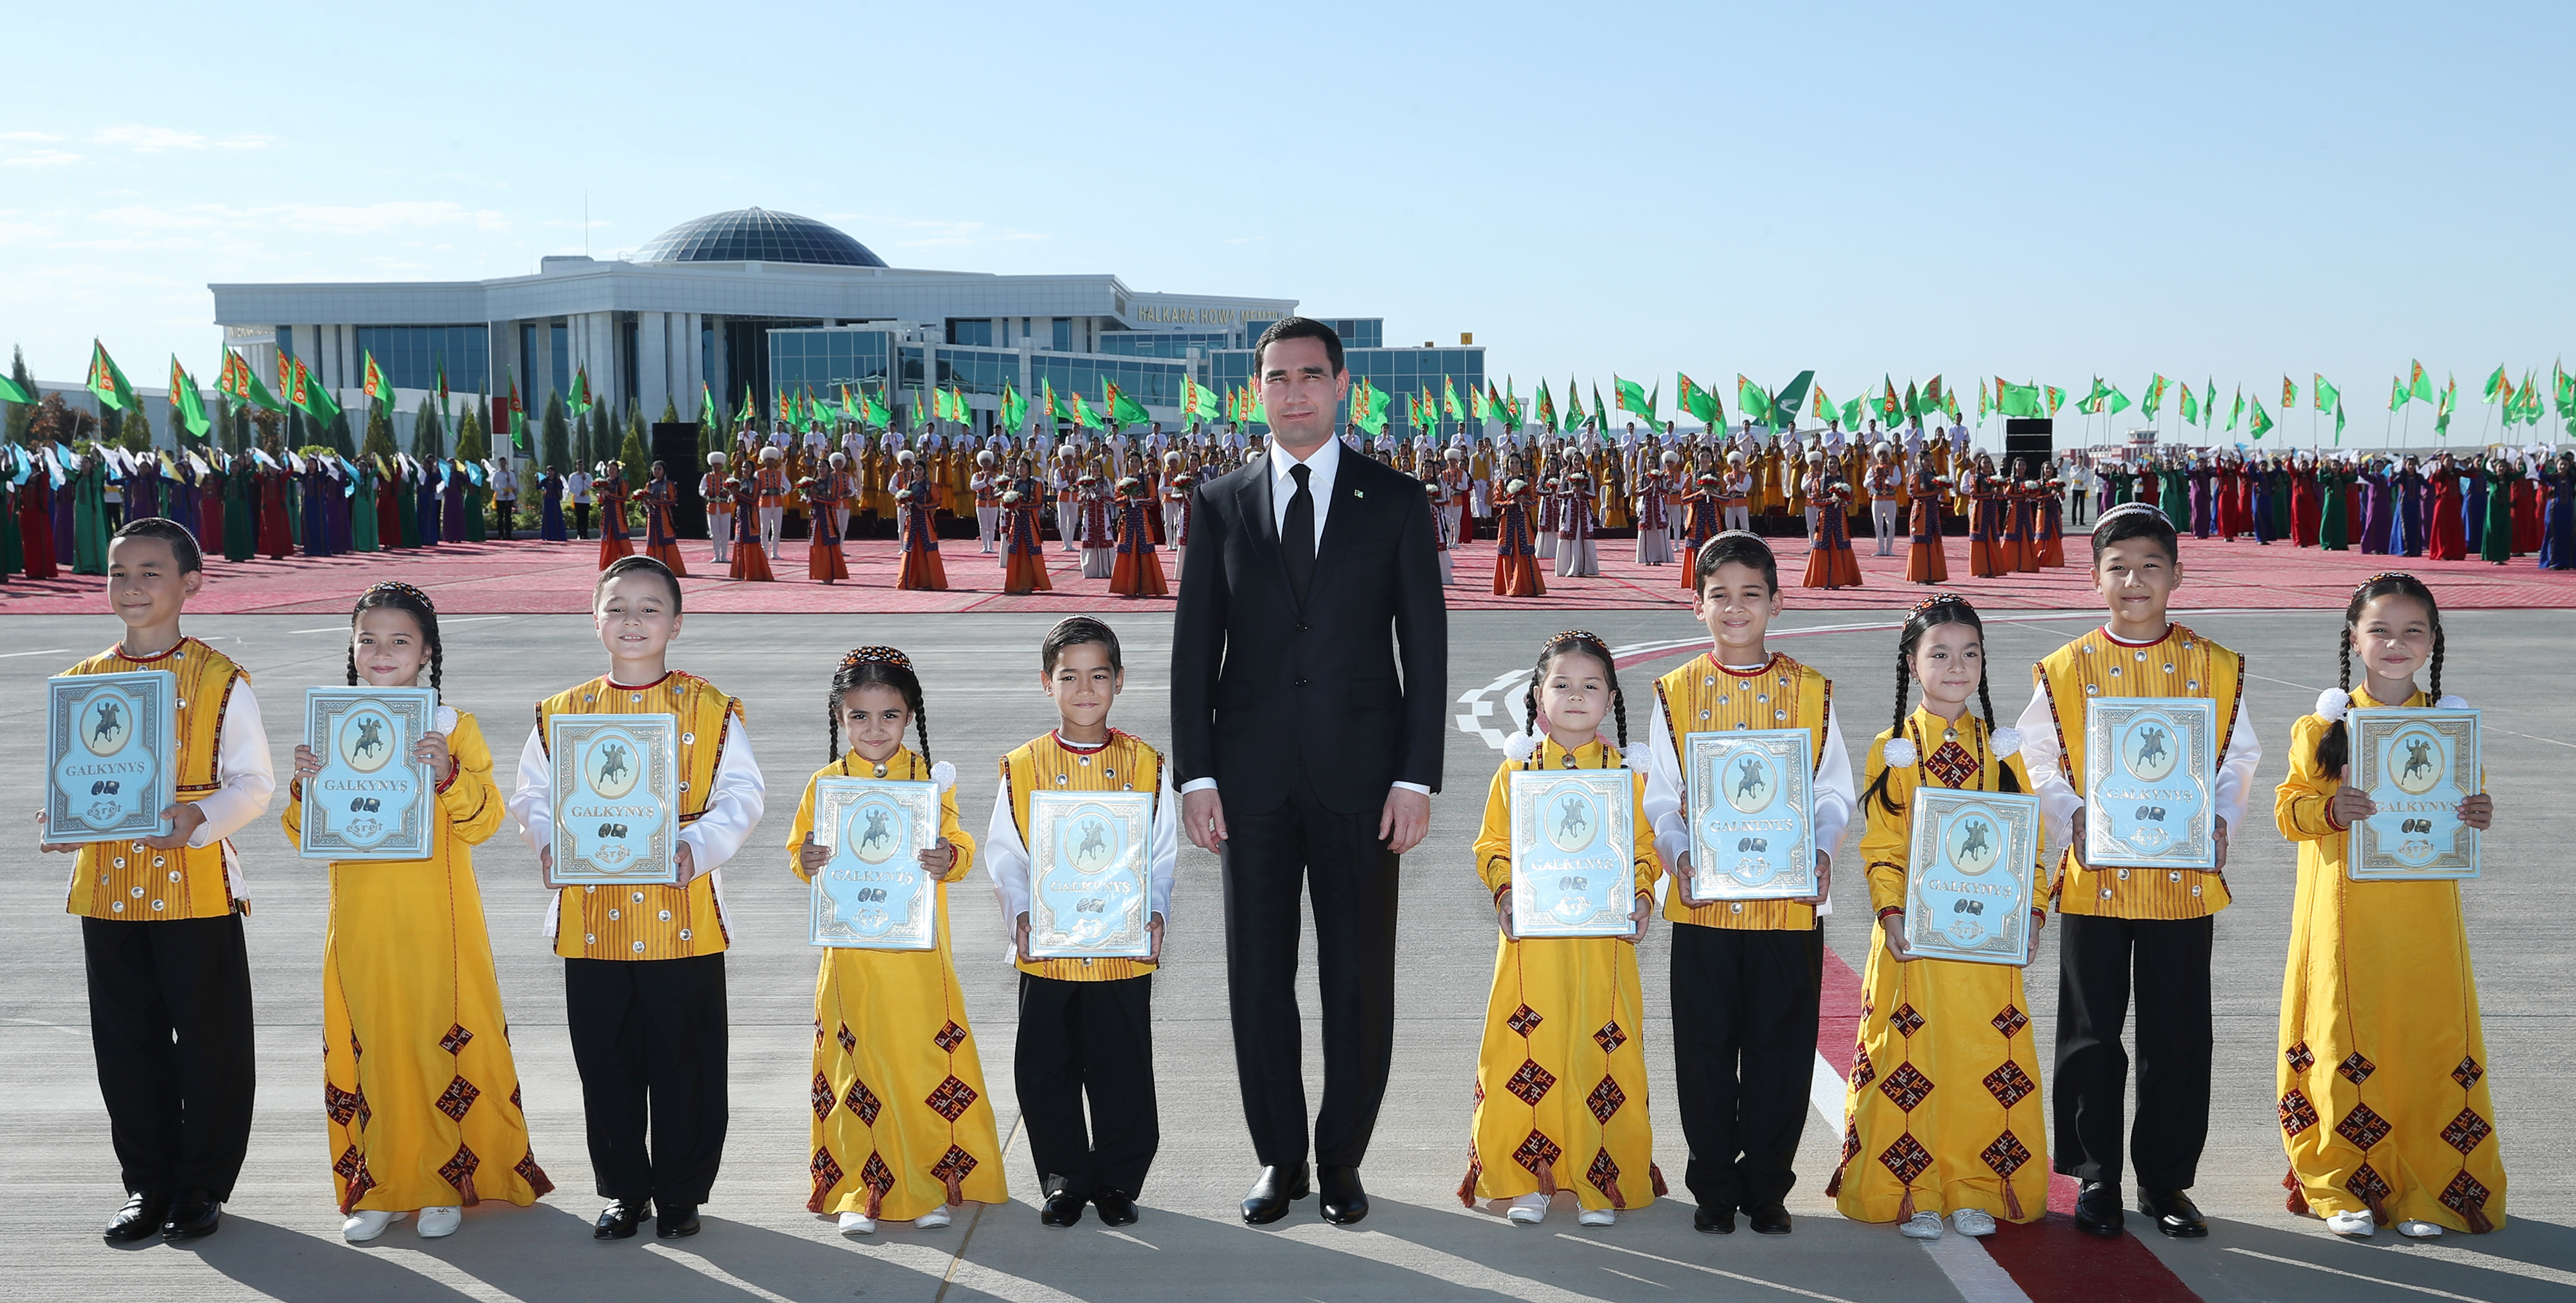 The holiday trip of the President of Turkmenistan to Lebap Velayat